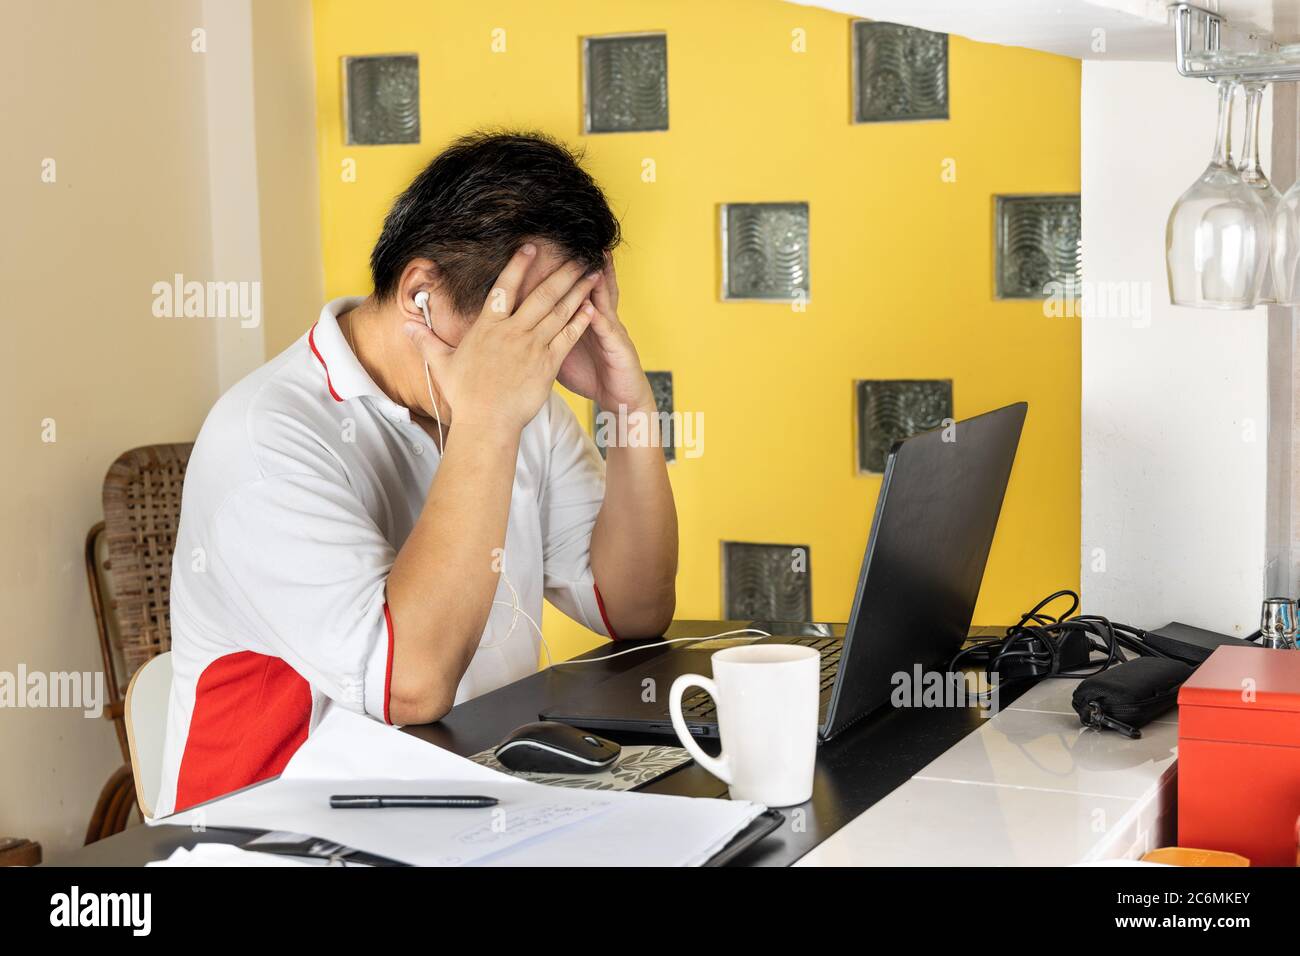 Matured Asian business man with both hands on forehead in stressful expression in work from home video conference call in Malaysia Stock Photo